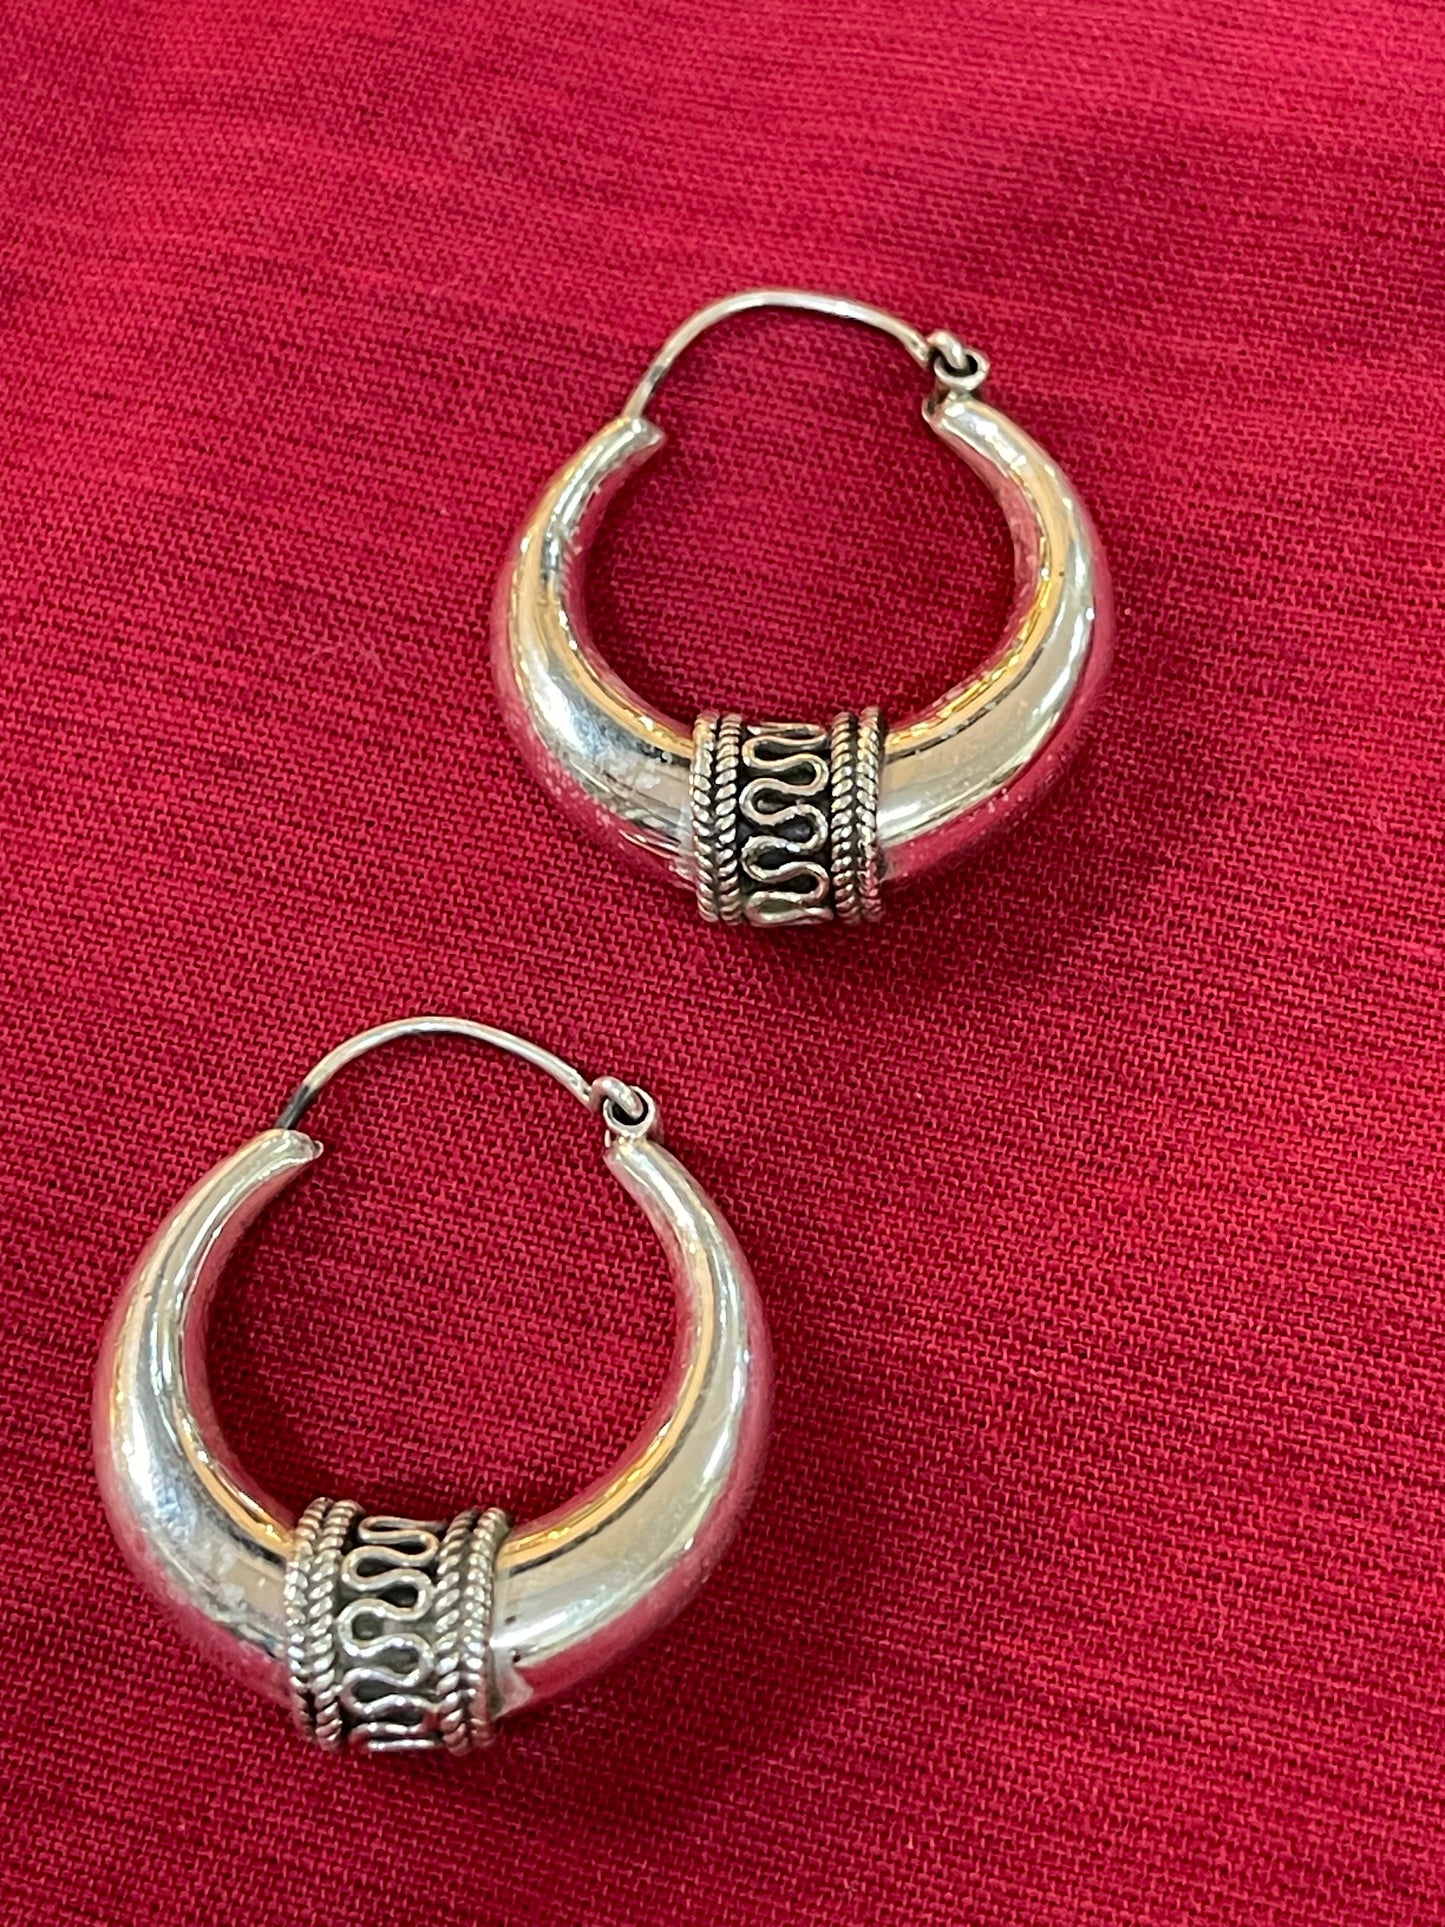 Round hoops with wavy pattern - Sterling 92.5 silver earrings